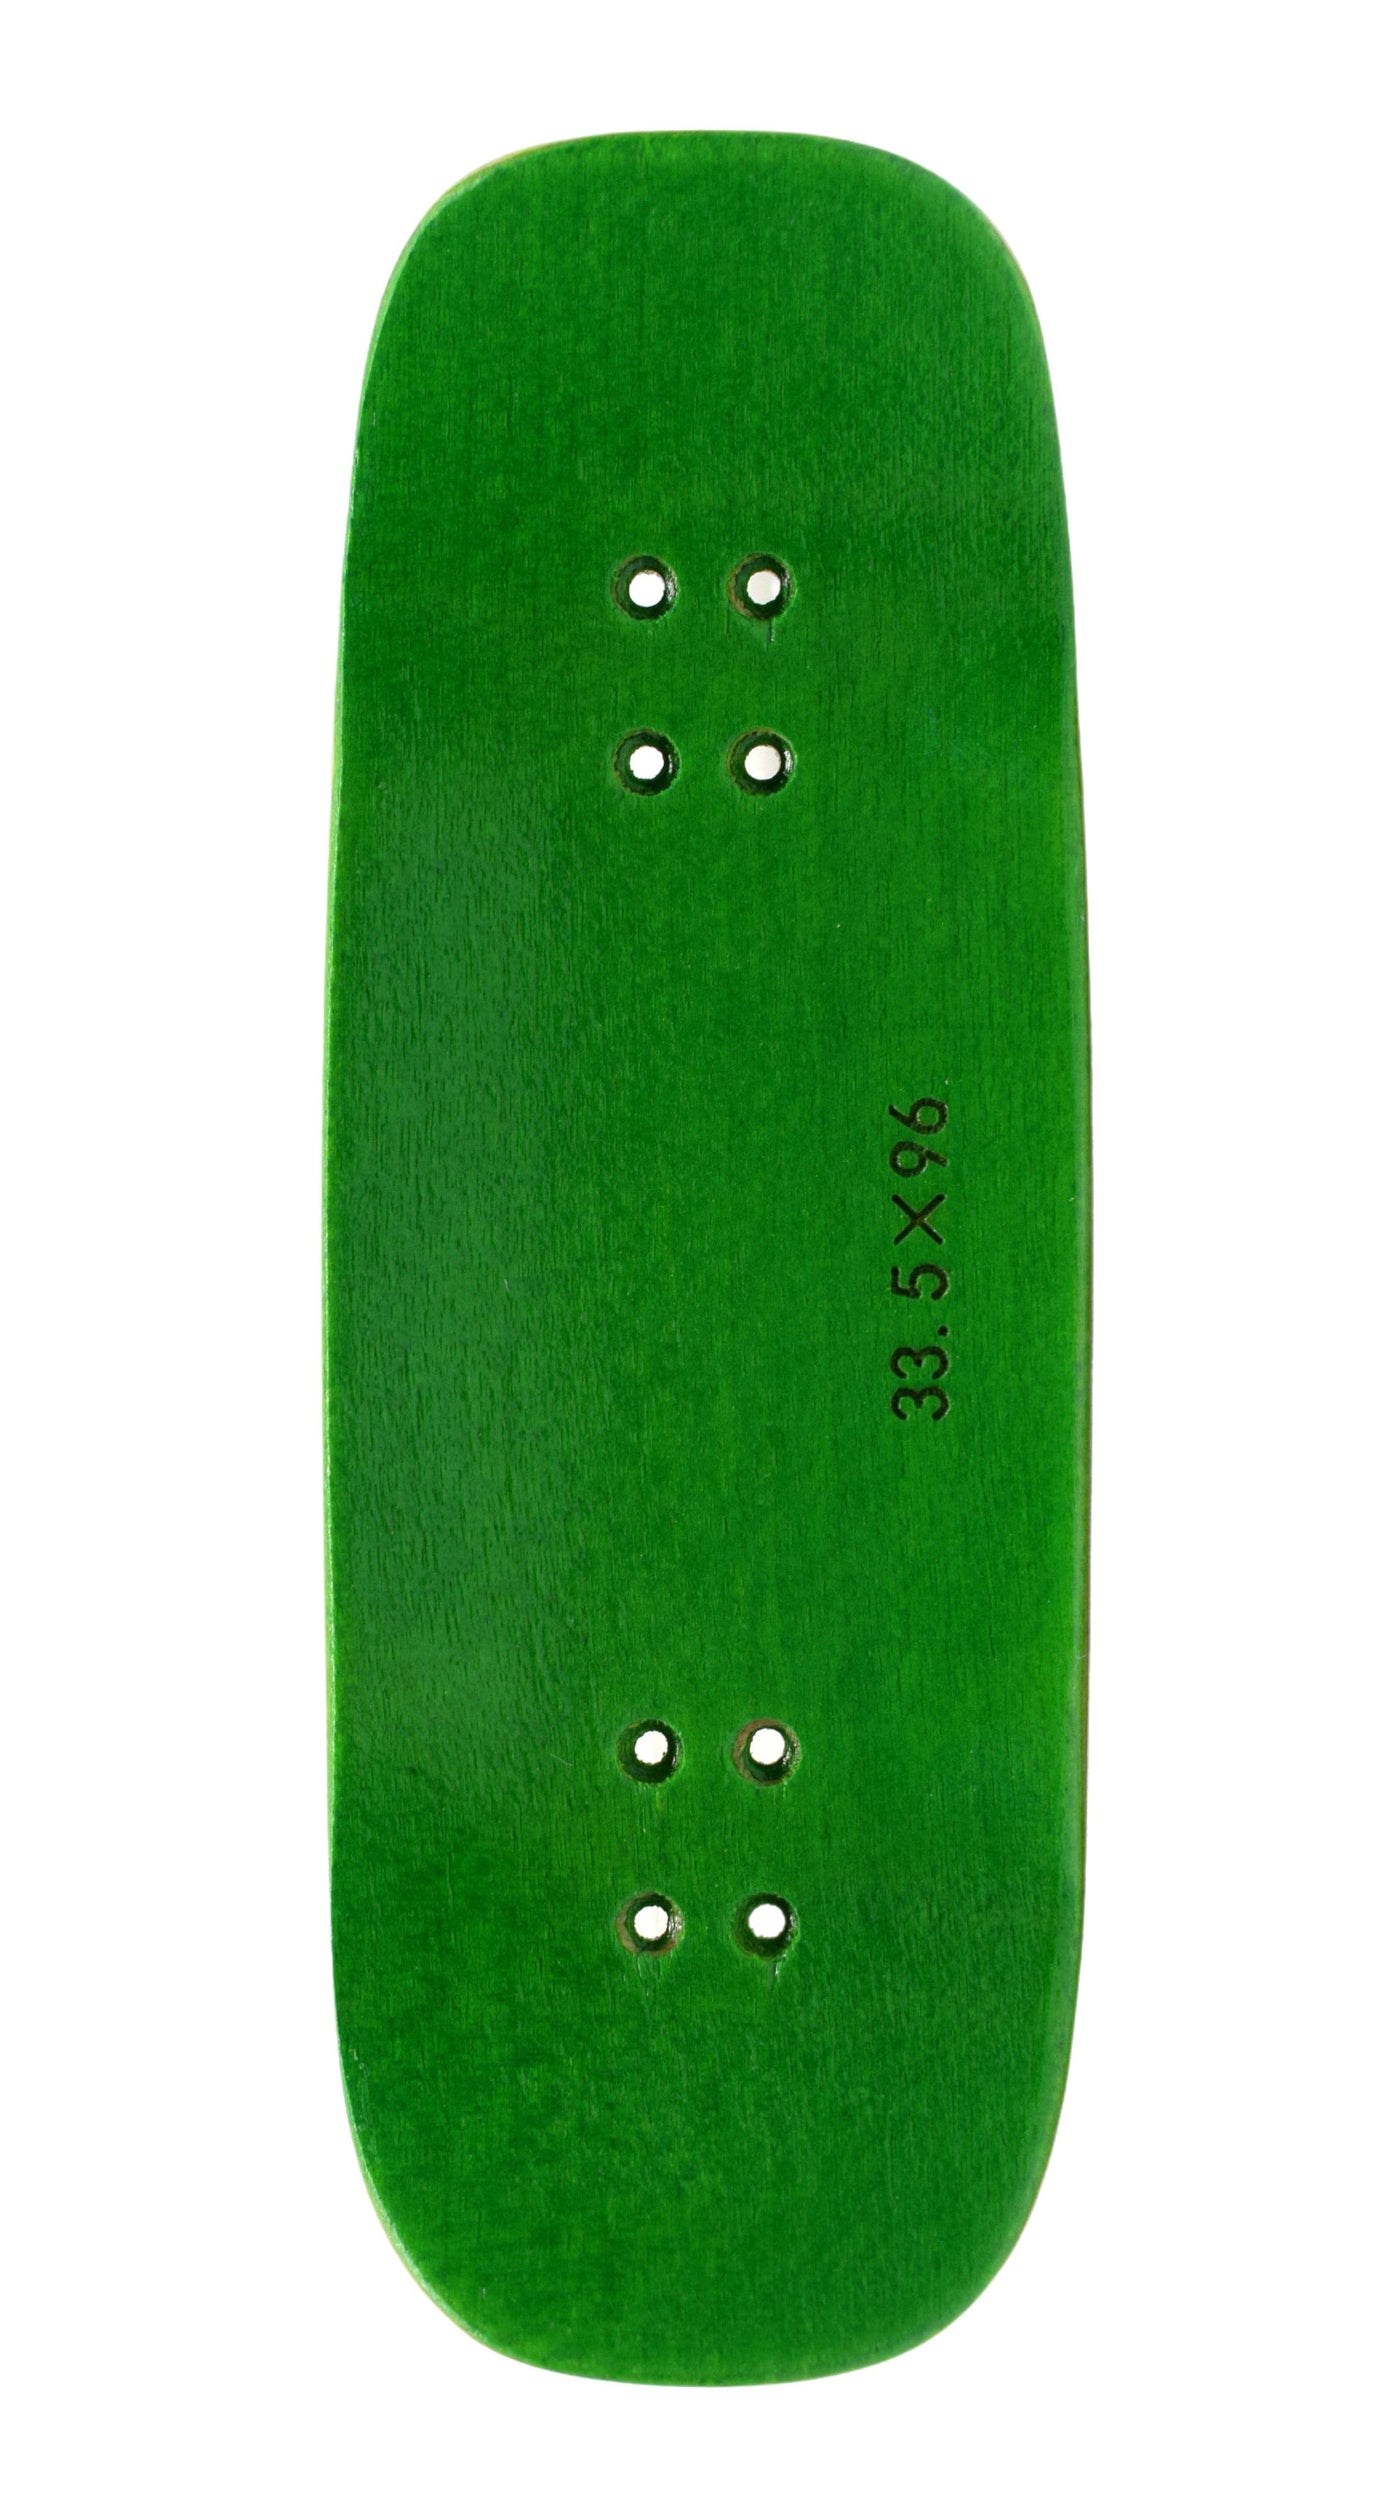 Teak Tuning PROlific Wooden 5 Ply Fingerboard Boxy Deck 32x96mm - Ghillie Green - with Color Matching Mid Ply